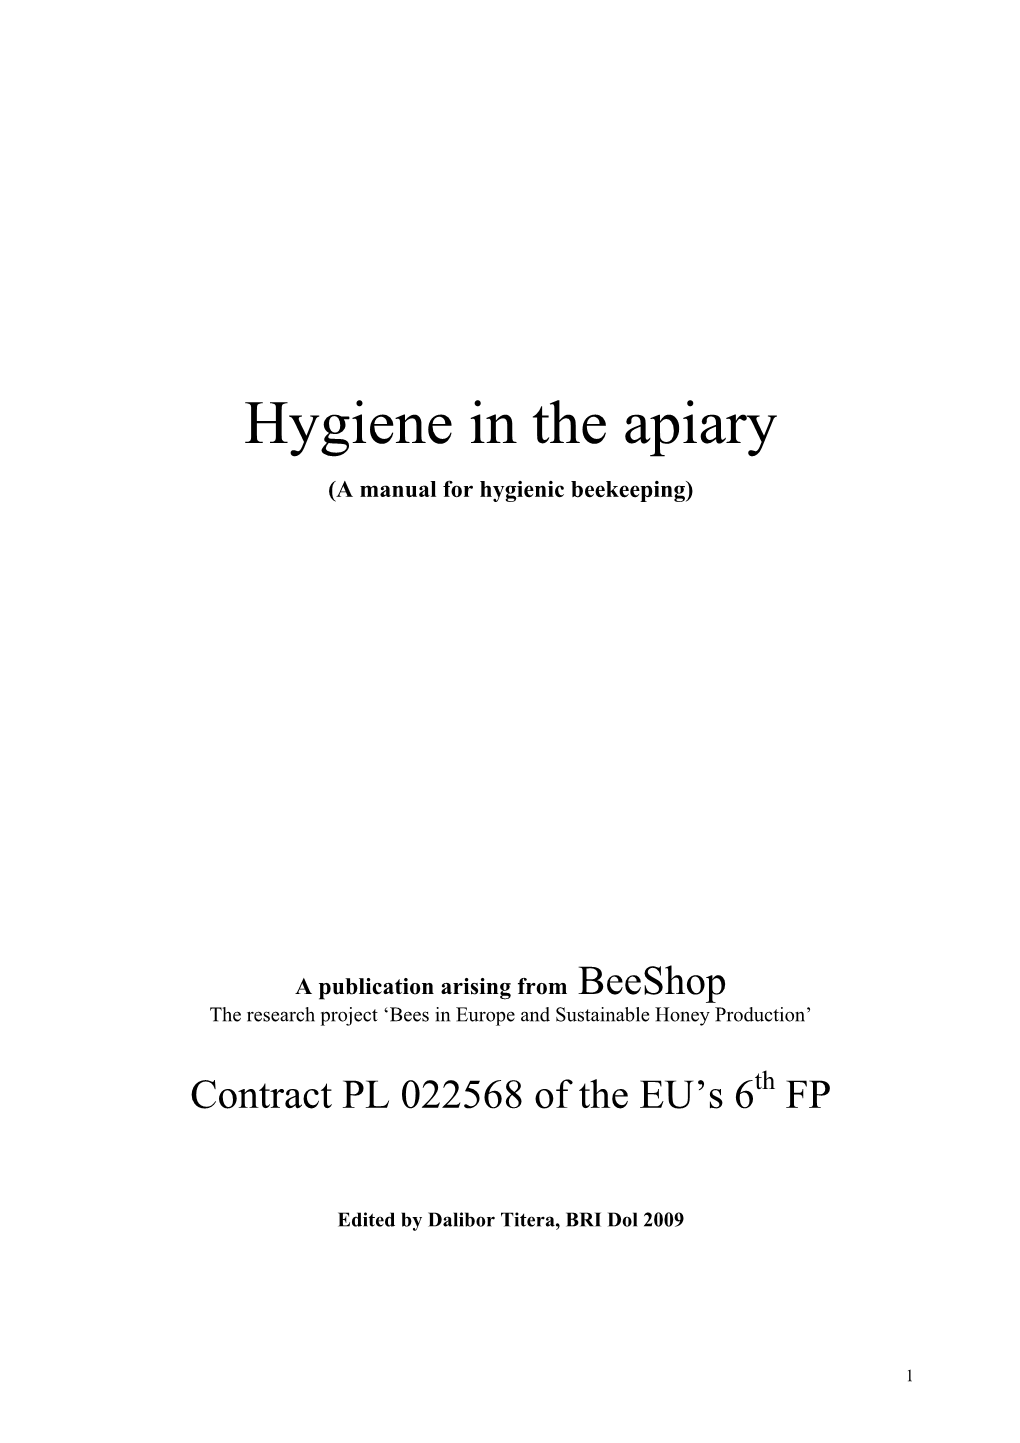 Hygiene in the Apiary